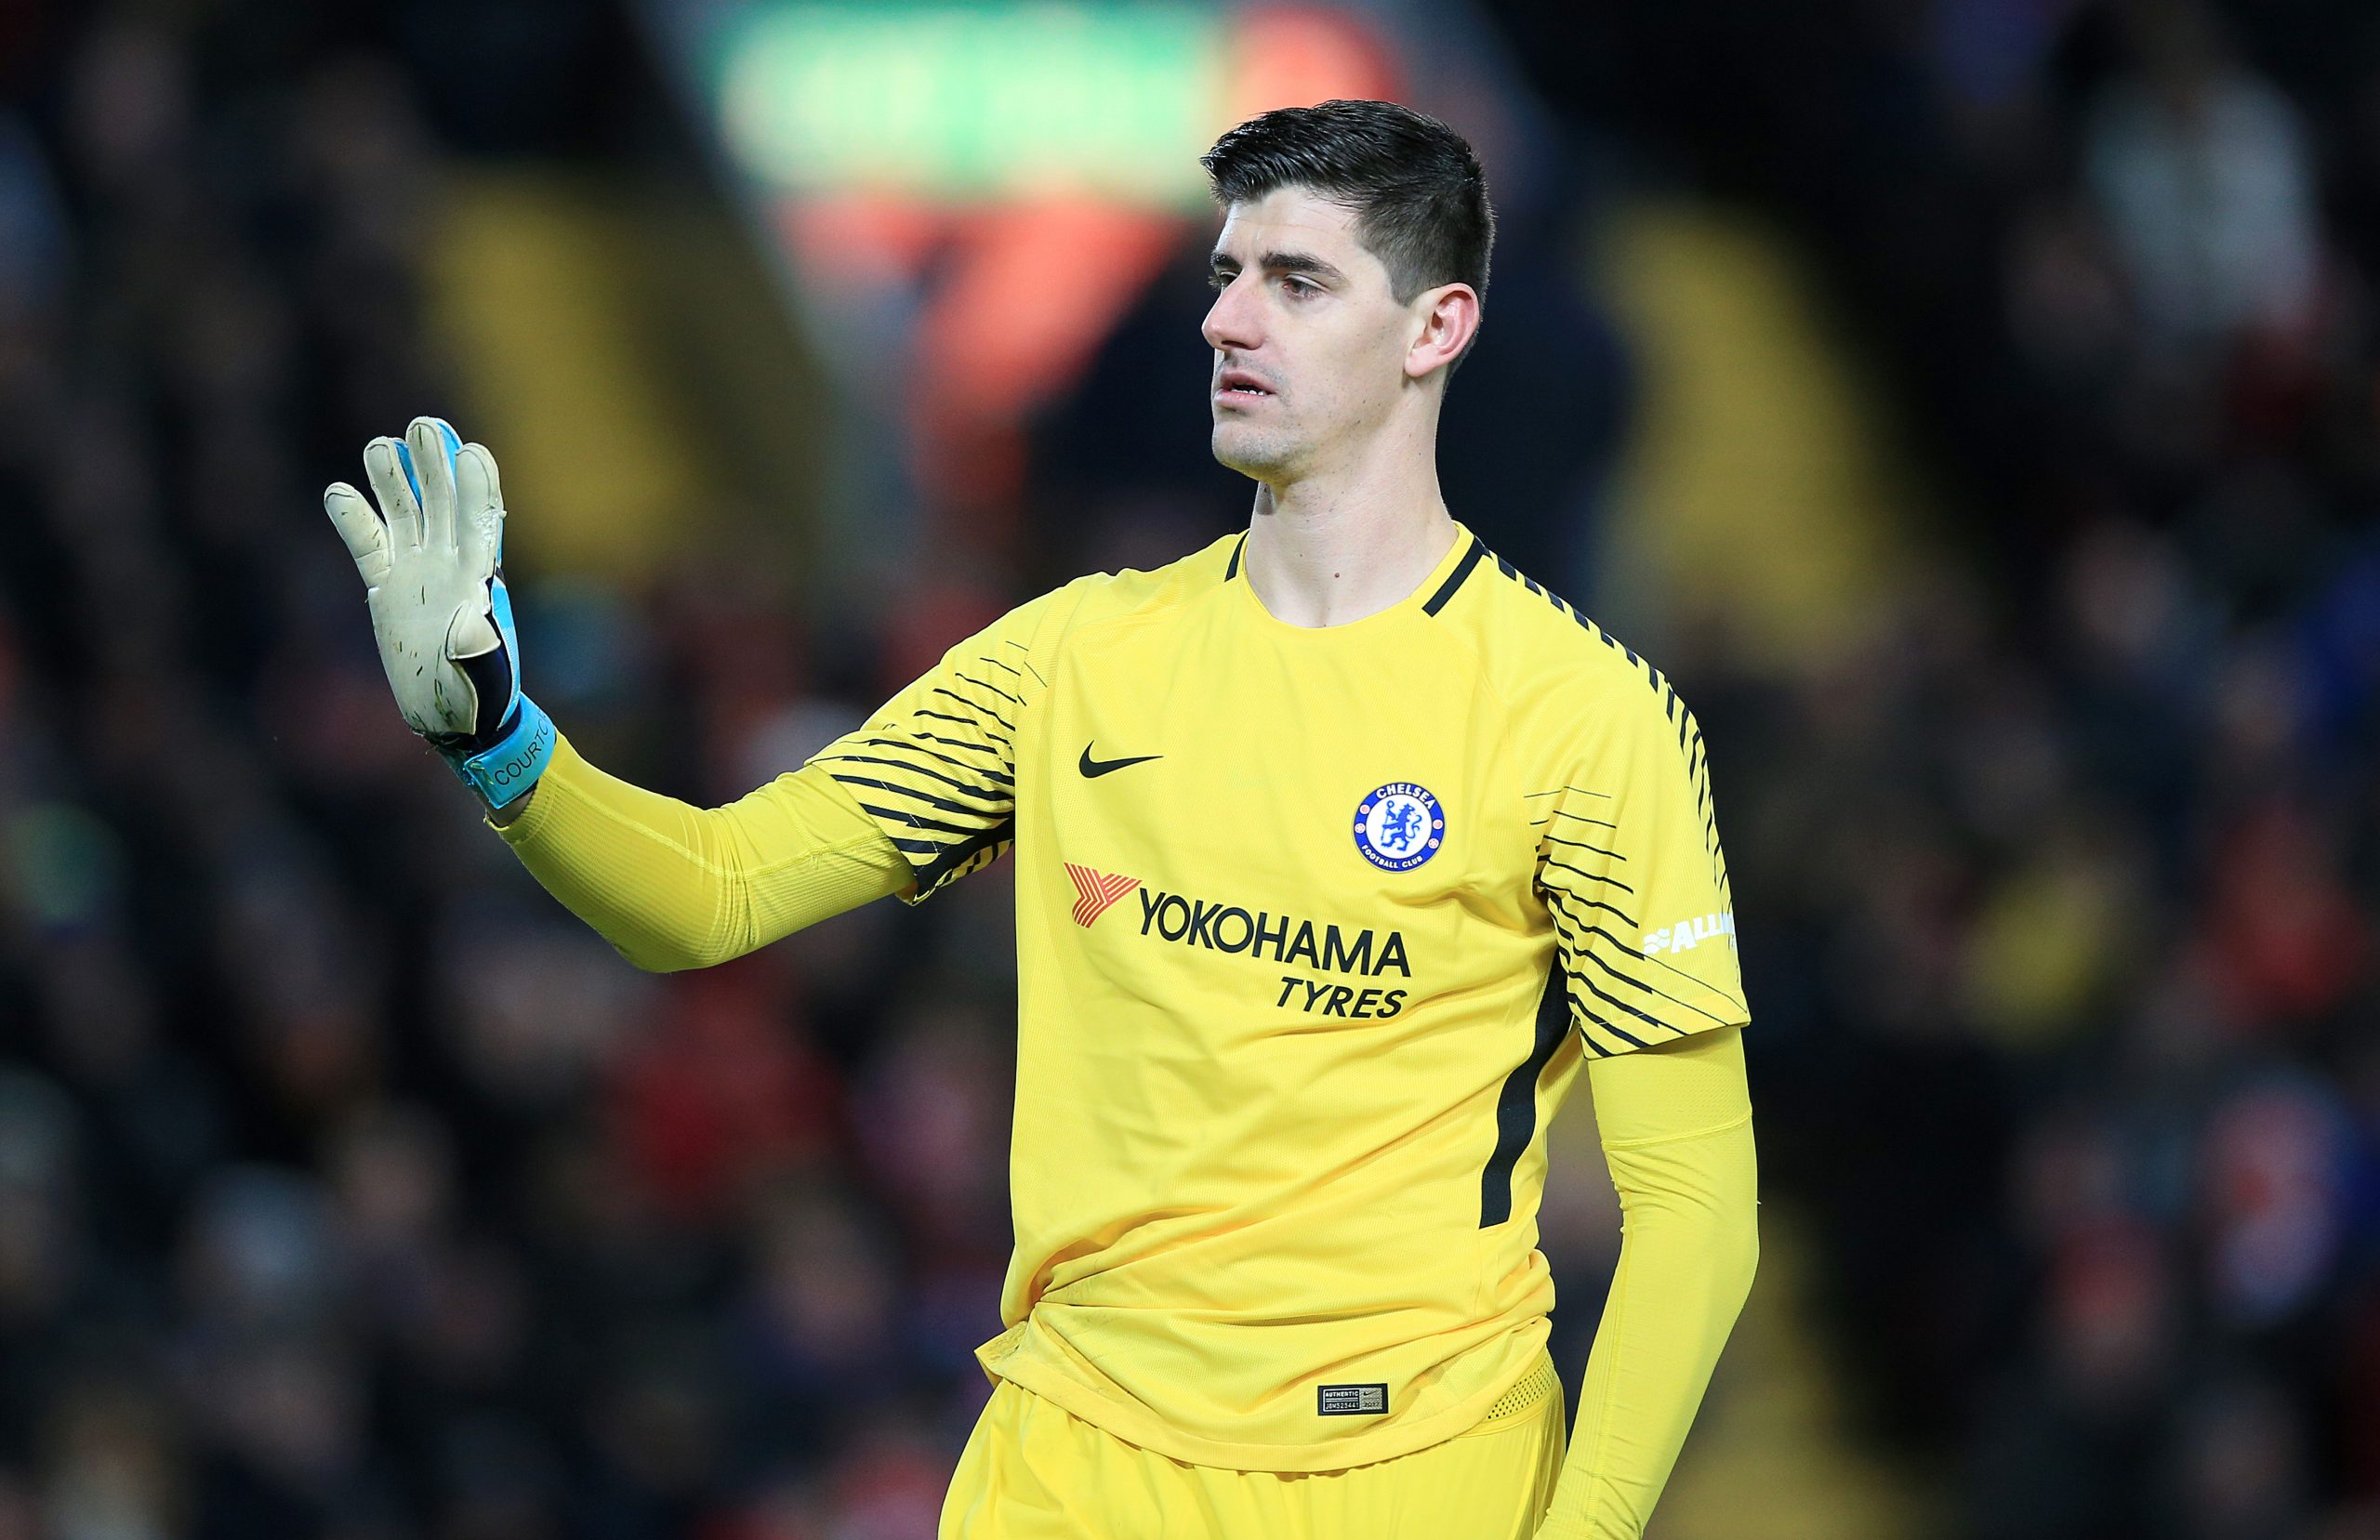 Courtois and Pickford: The Tall and Short of Keeper Styles